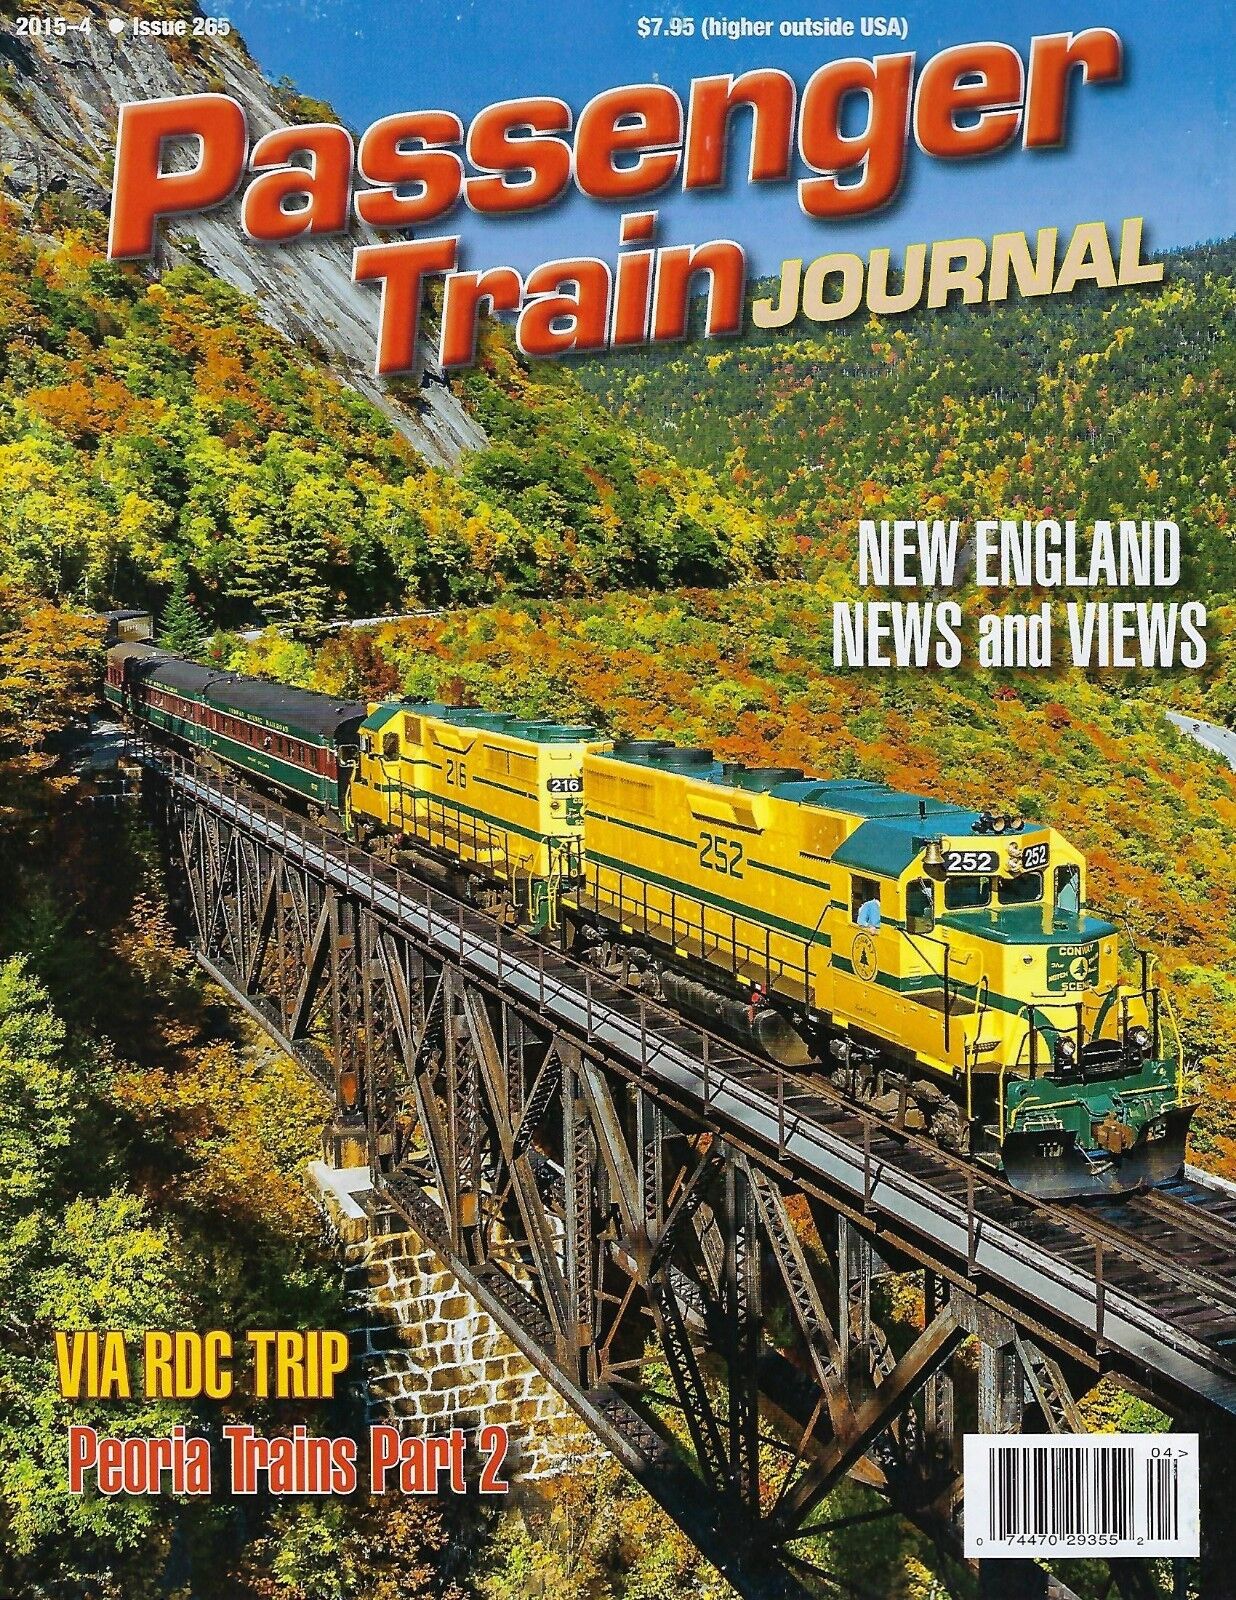 PASSENGER TRAIN JOURNAL, 4th Qtr 2015 (NEW ENGLAND, PEORIA, DENVER) NEW issue